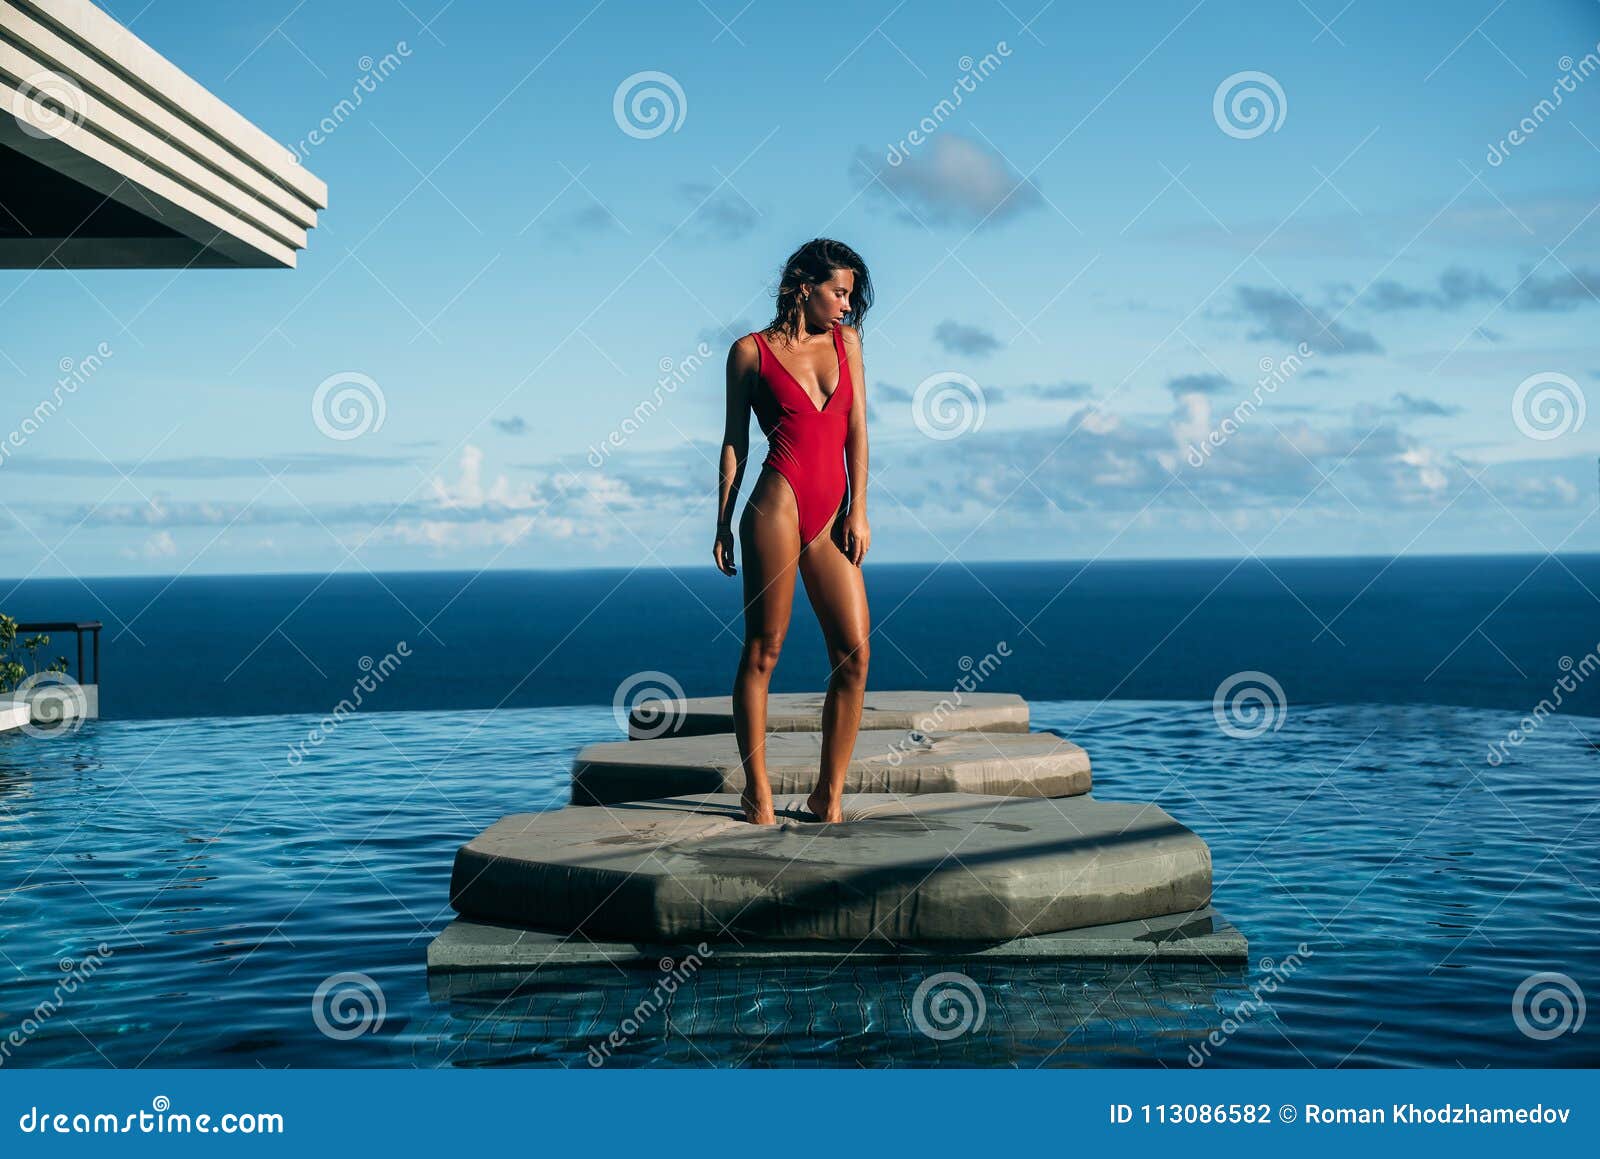 Handsome View of Girl Relaxing at Swimming Pool with Ocean at ...